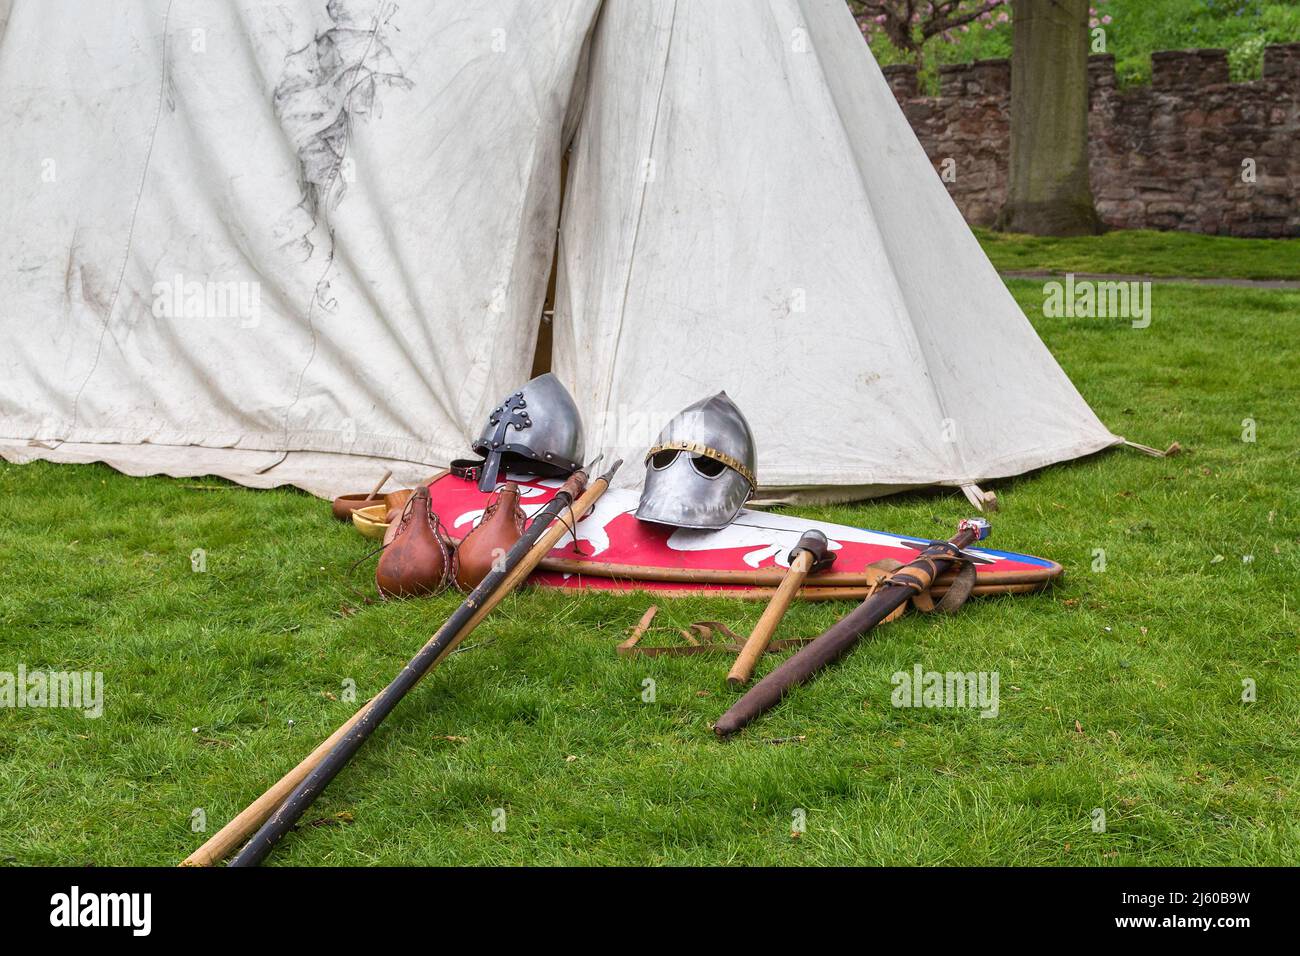 The helmets, shields and weaponry of medieval knights laid out on the grass by a tent. Part of an historical society living history camp. Stock Photo